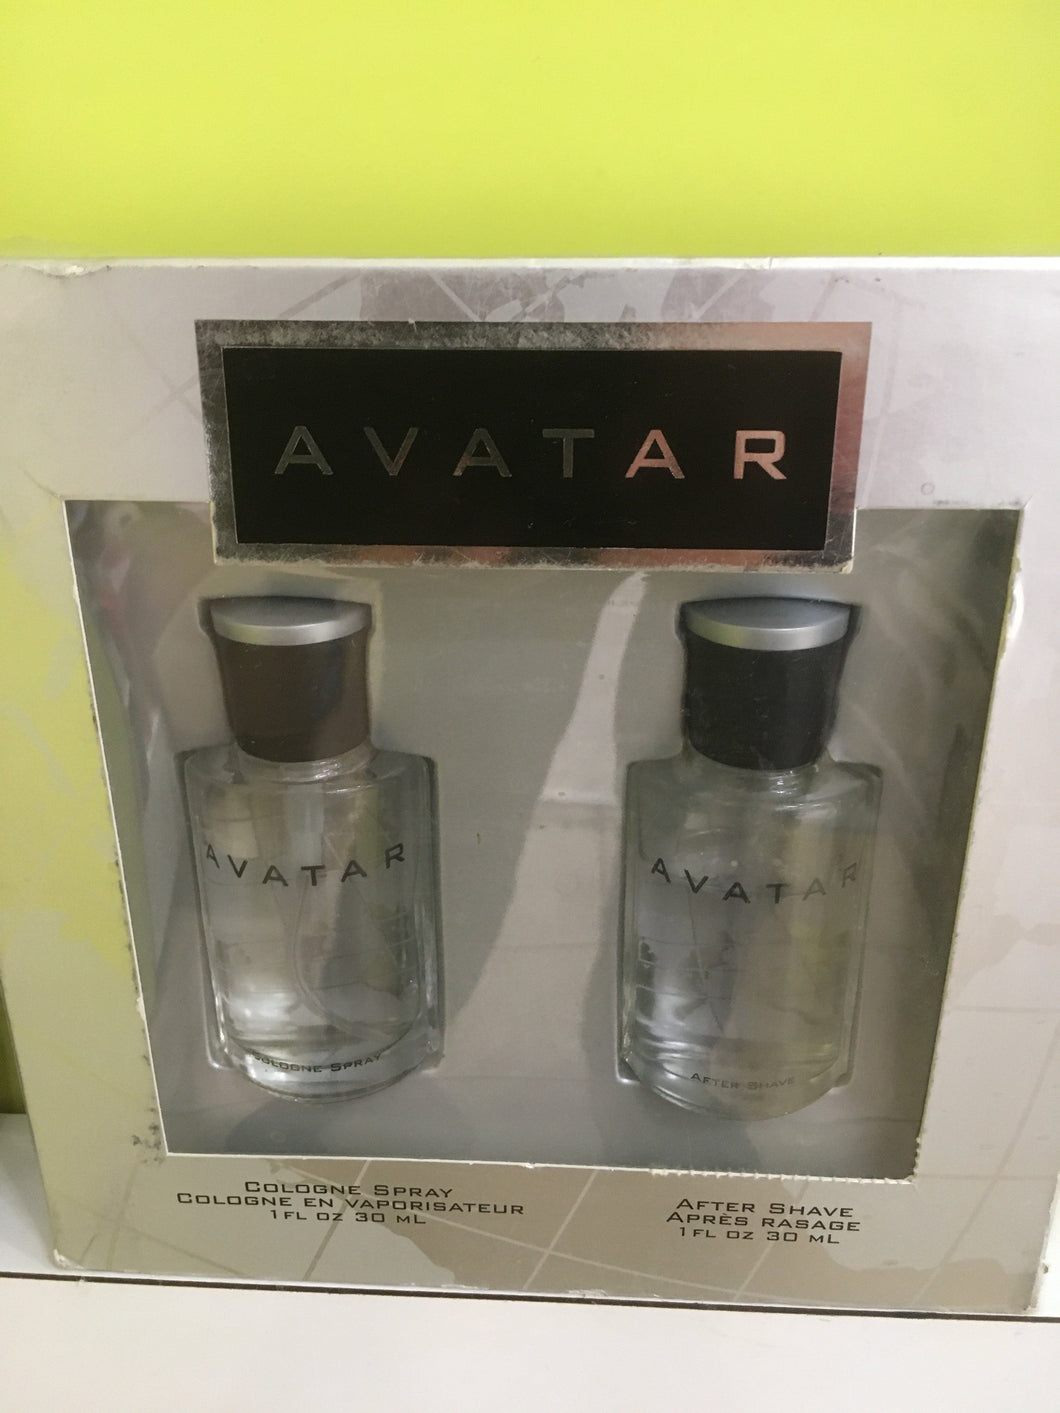 Gift Set - Avatar By Coty Cologne Spray 1oz. / 30 ml + After Shave 1 oz. / 30 ml ( 3/4th full)  2 pieces For Man Rare Discontinued Vintage